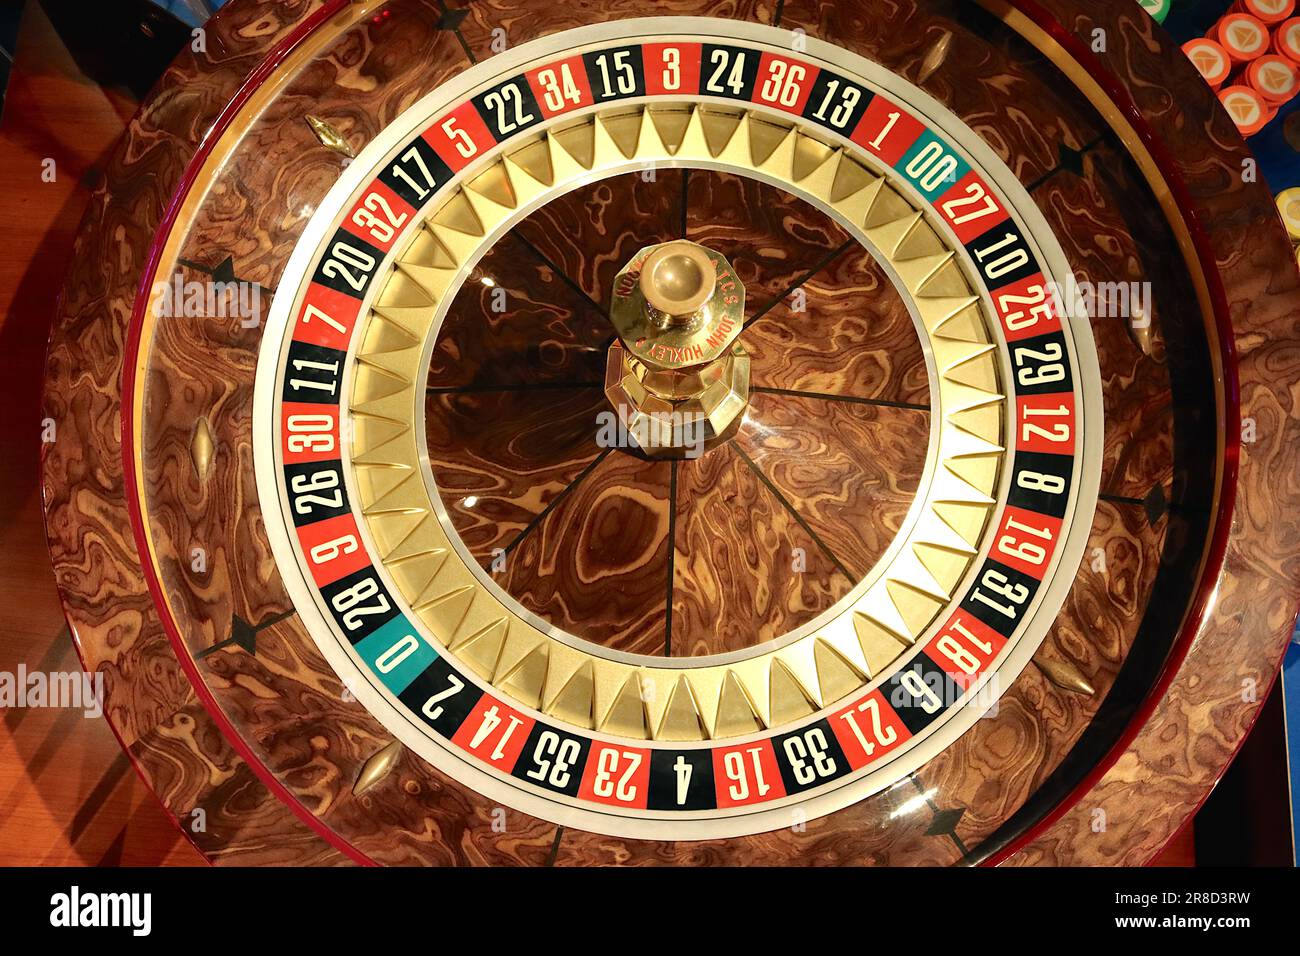 Casino roulette wheel displaying 38 wheel numbers and pockets featuring a double zero pocket, making this an American style wheel, April 2023.. Stock Photo